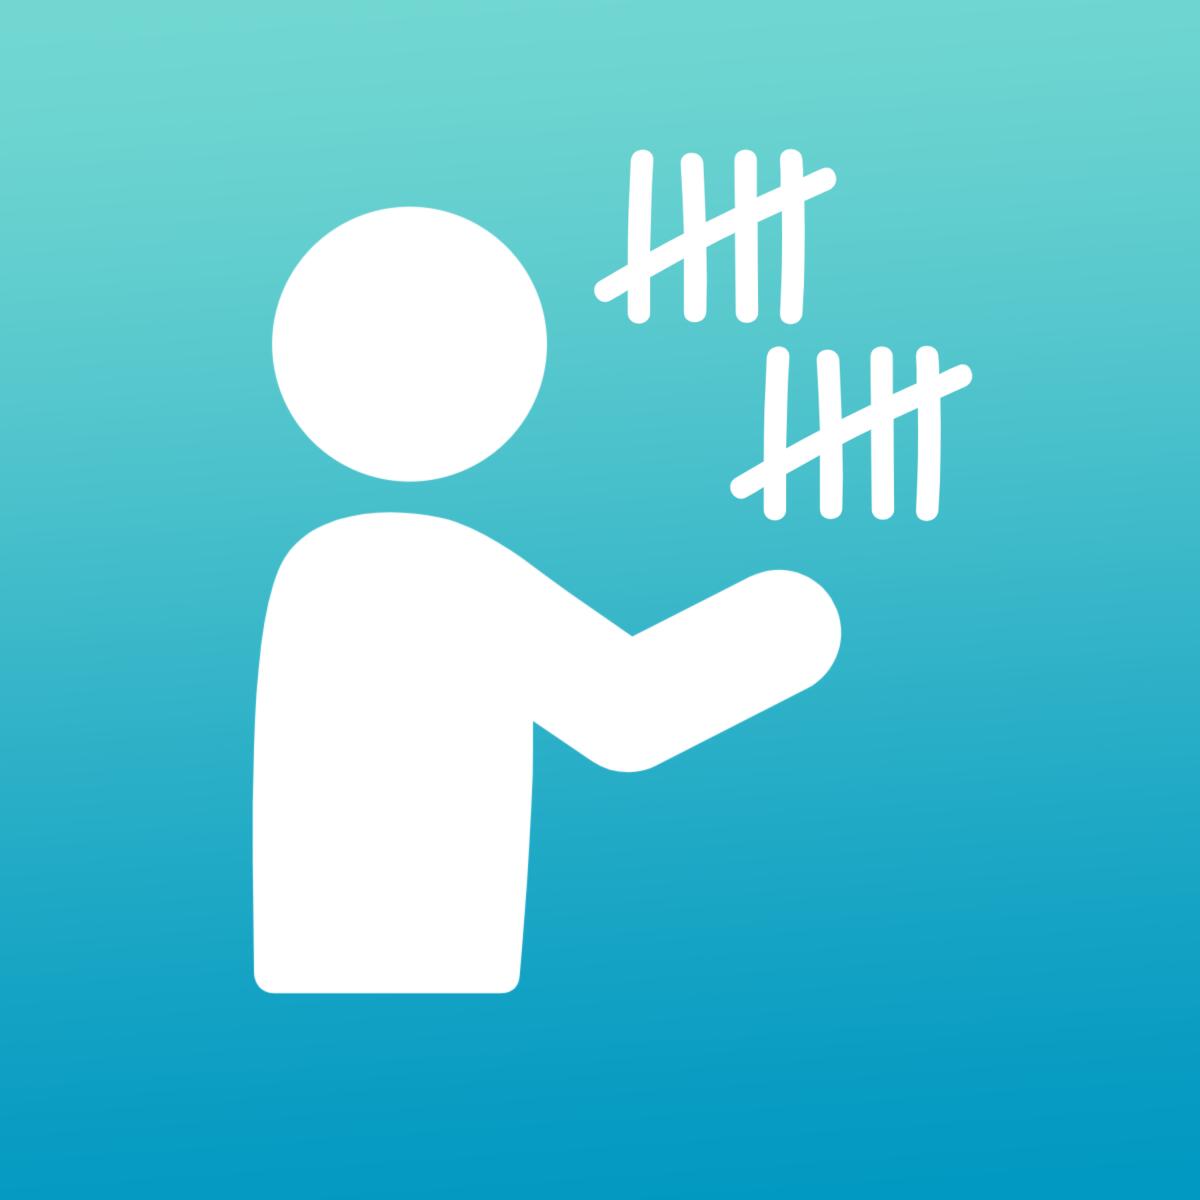 Pictogram of person counting to 10